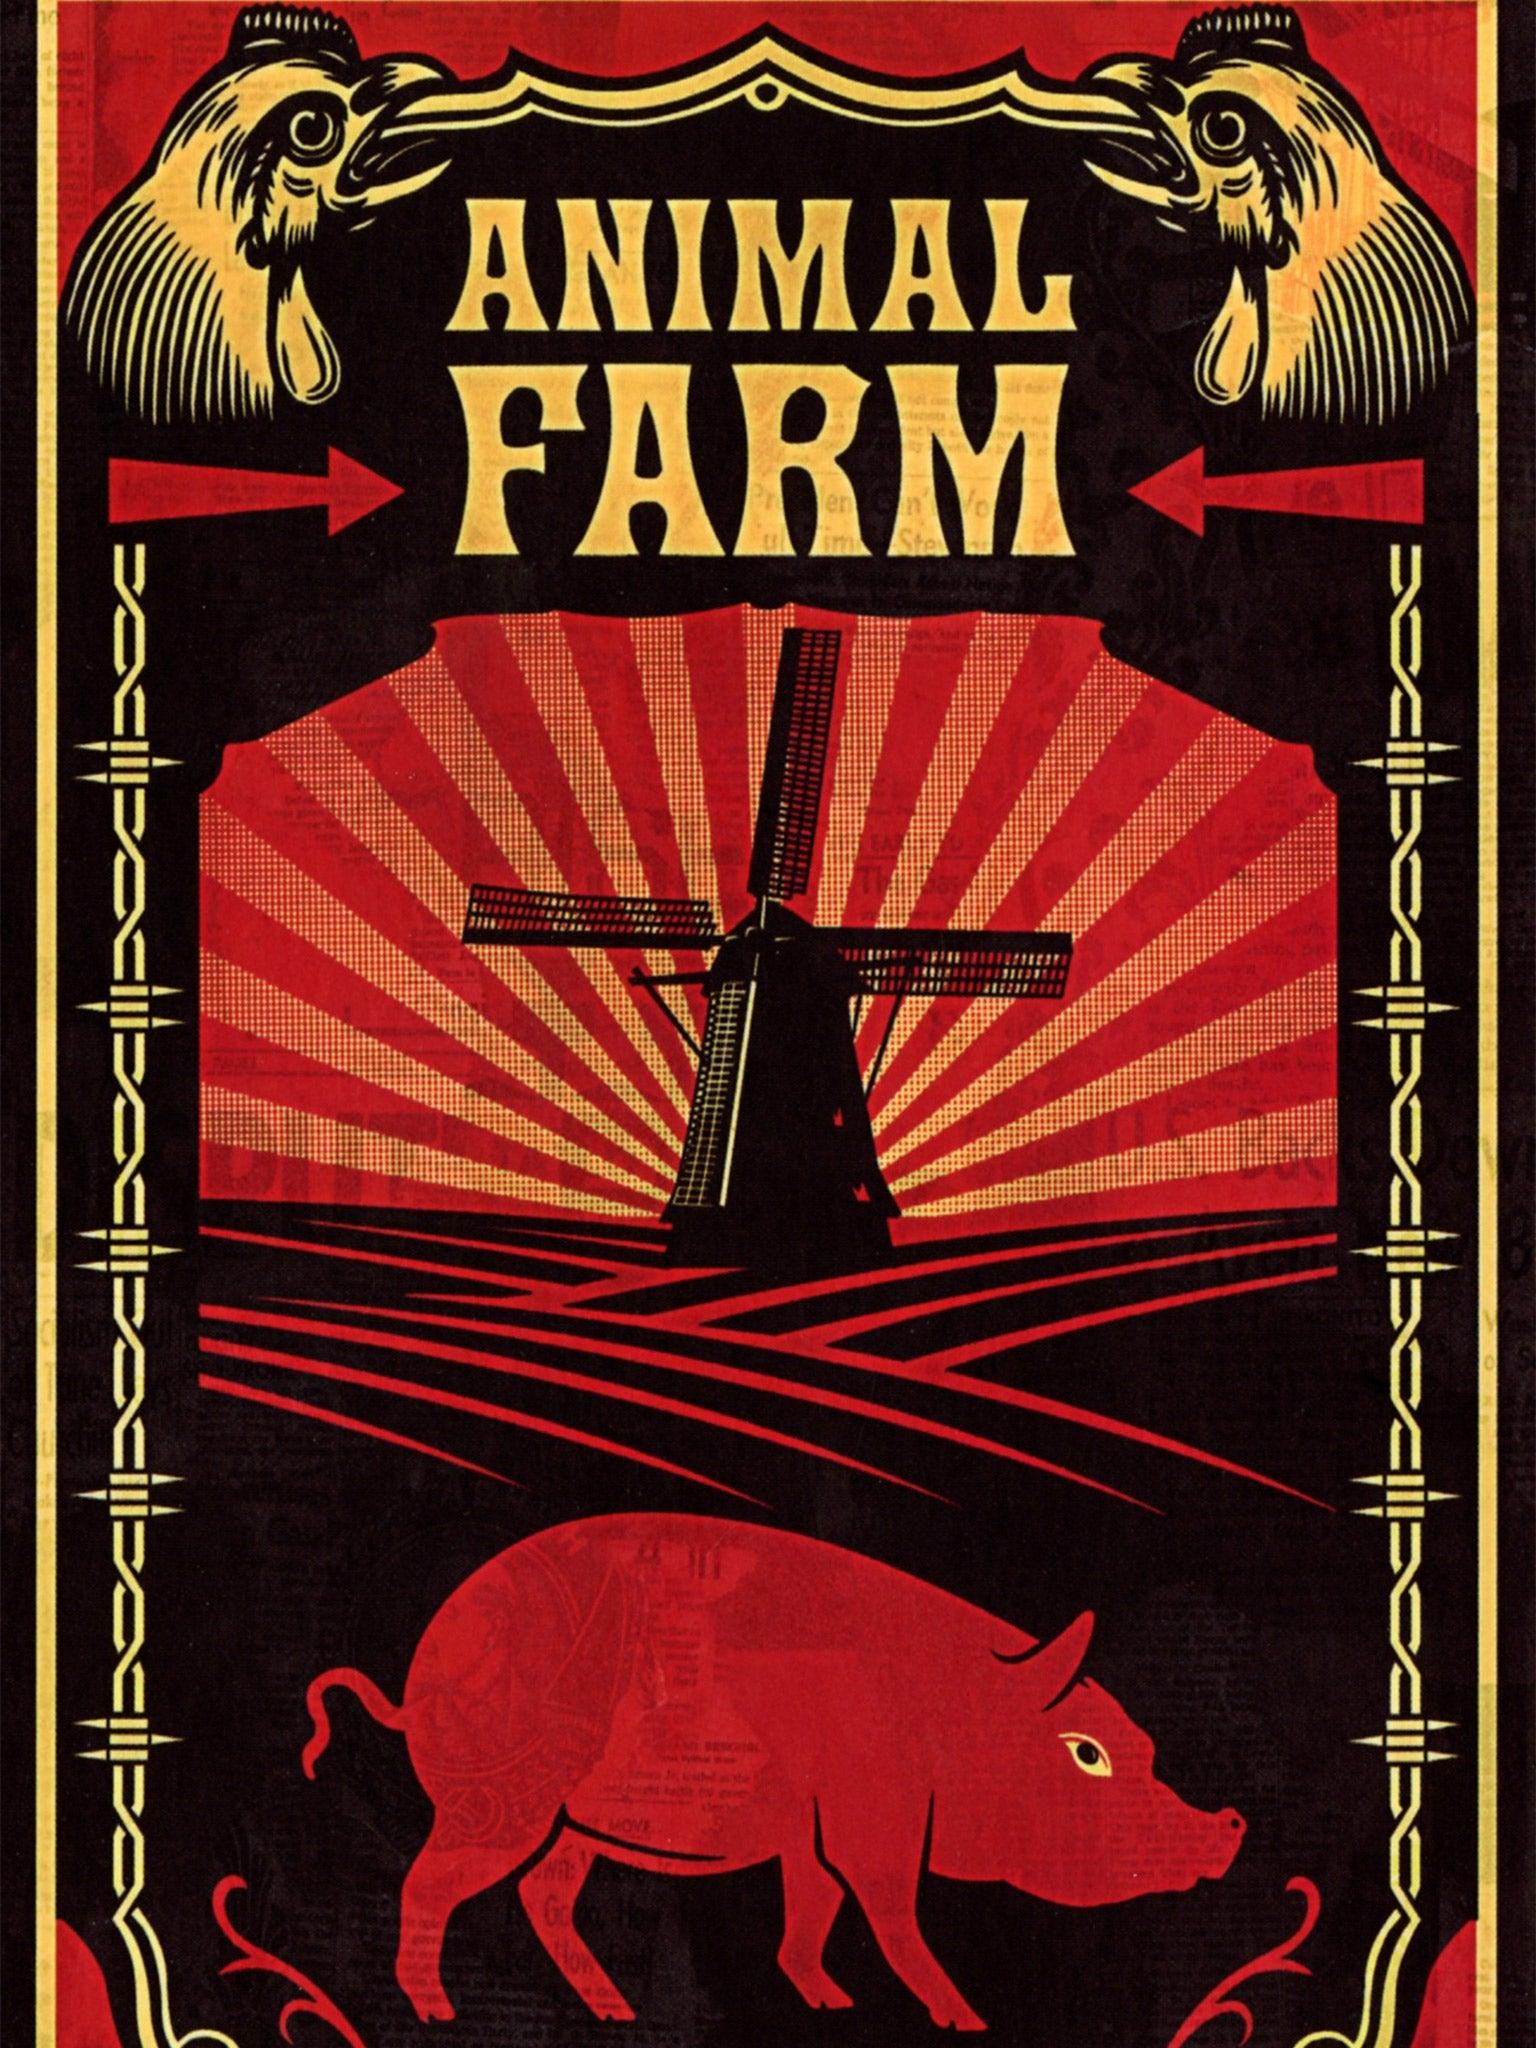 George Orwell's 'Animal Farm' was published in 1945